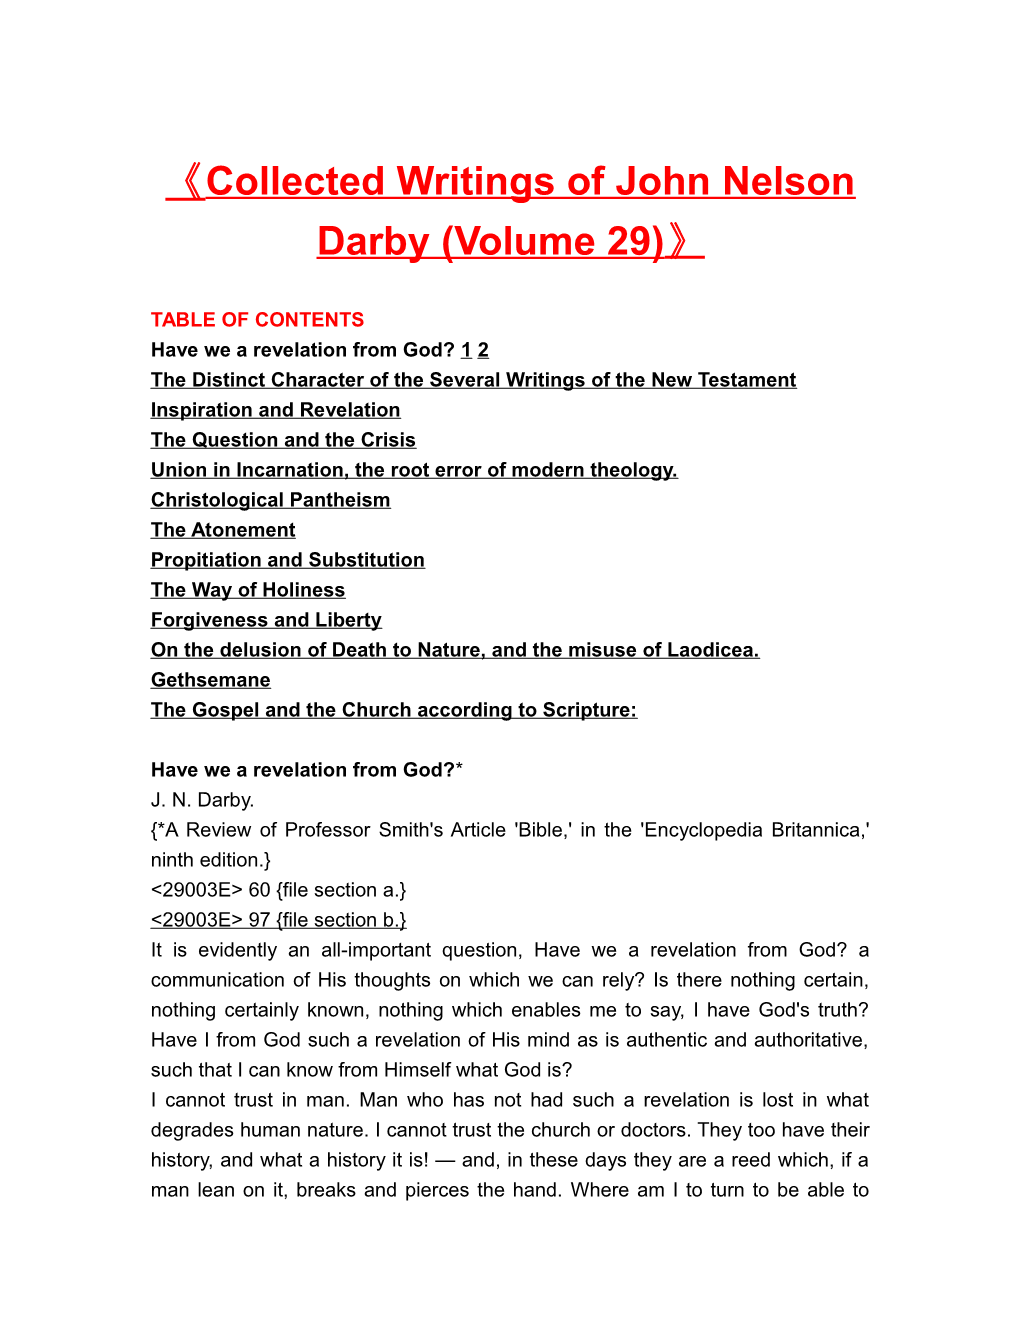 Collected Writings of John Nelson Darby (Volume 29)